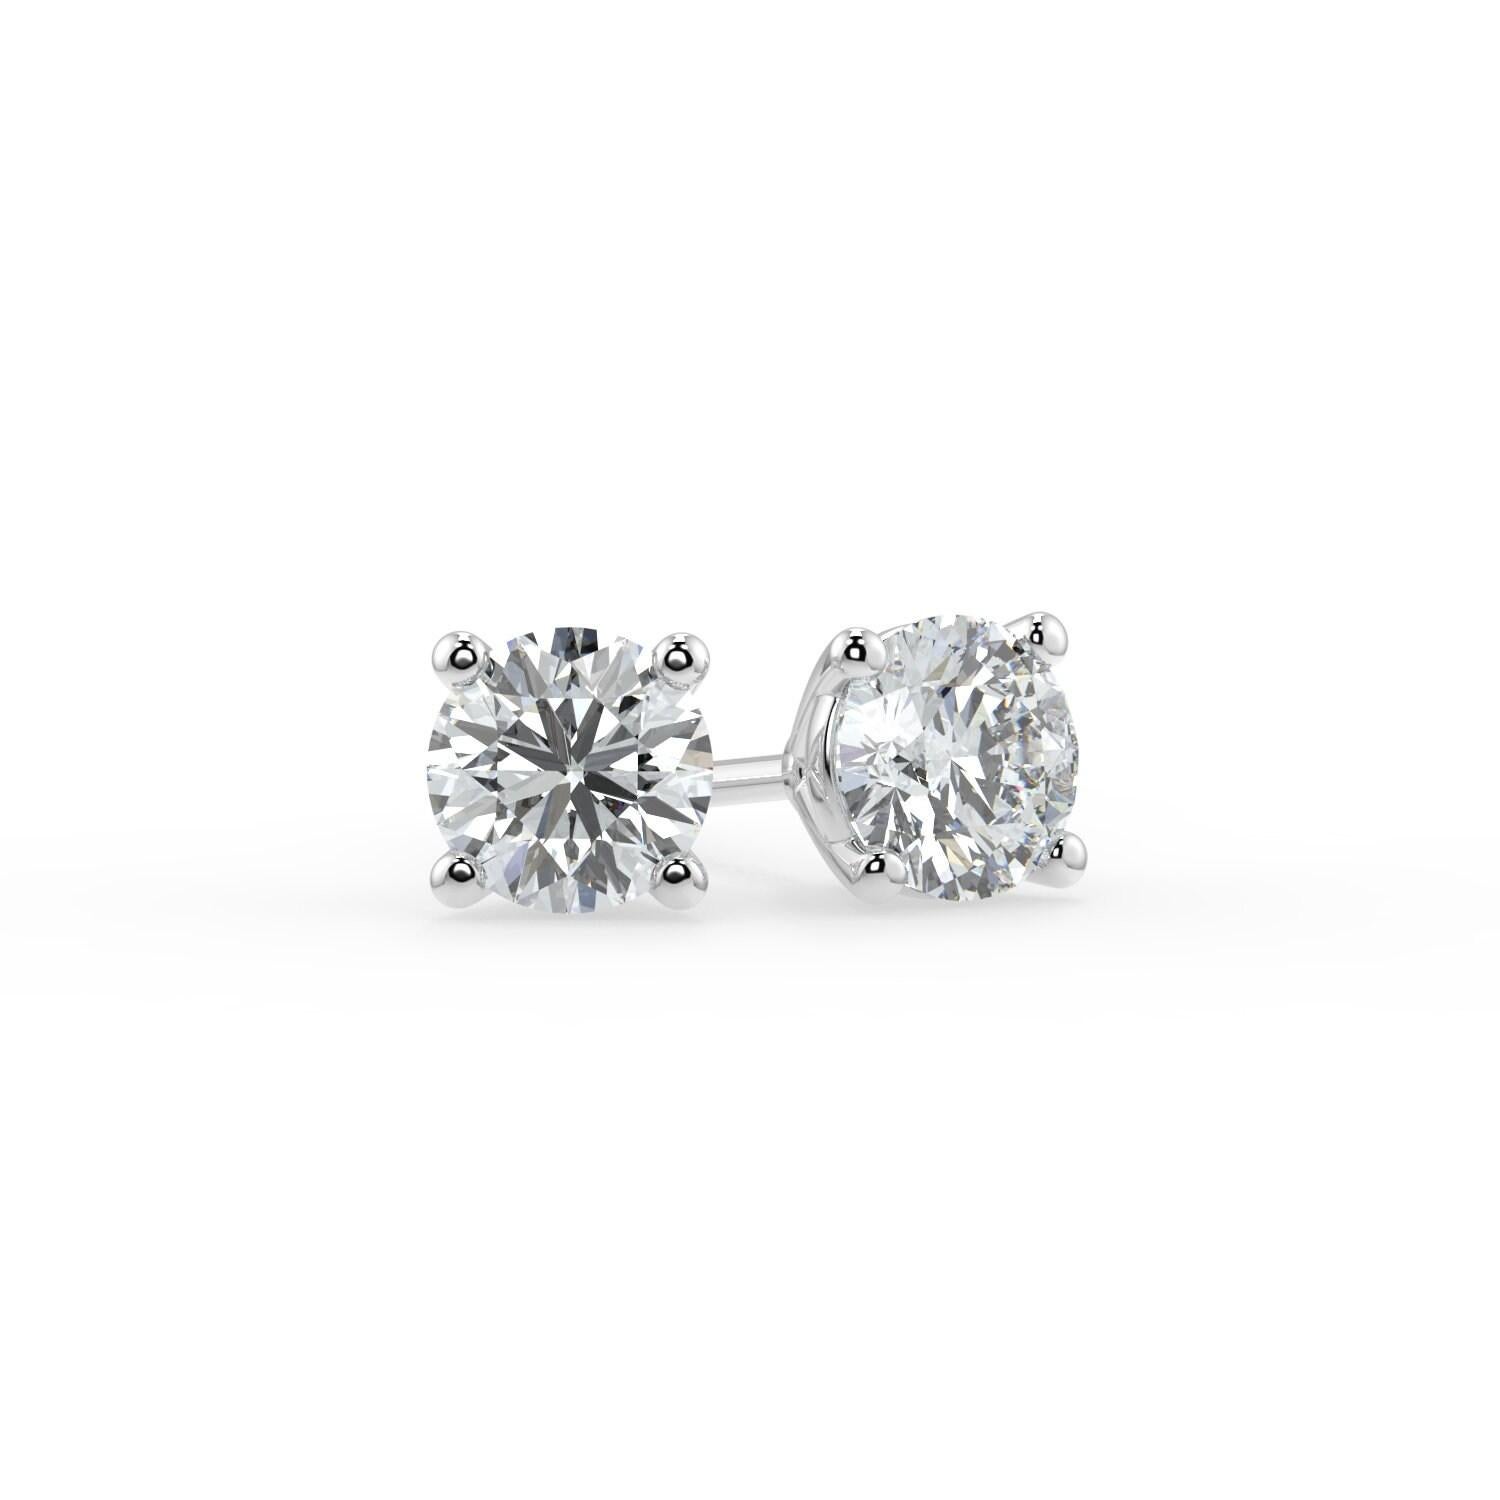 0.10 Ct Natural White Diamond  SI Clarity 4 Prong Martini Style  Style  Unisex Studs with Butterfly Pushbacks 14K White Gold 

Specifications:
Metal: 14k Gold 
Diamond Shape: Round
Natural Diamond carat weight: 0.10 CTW 
Diamond Clarity: SI

Aamiaa